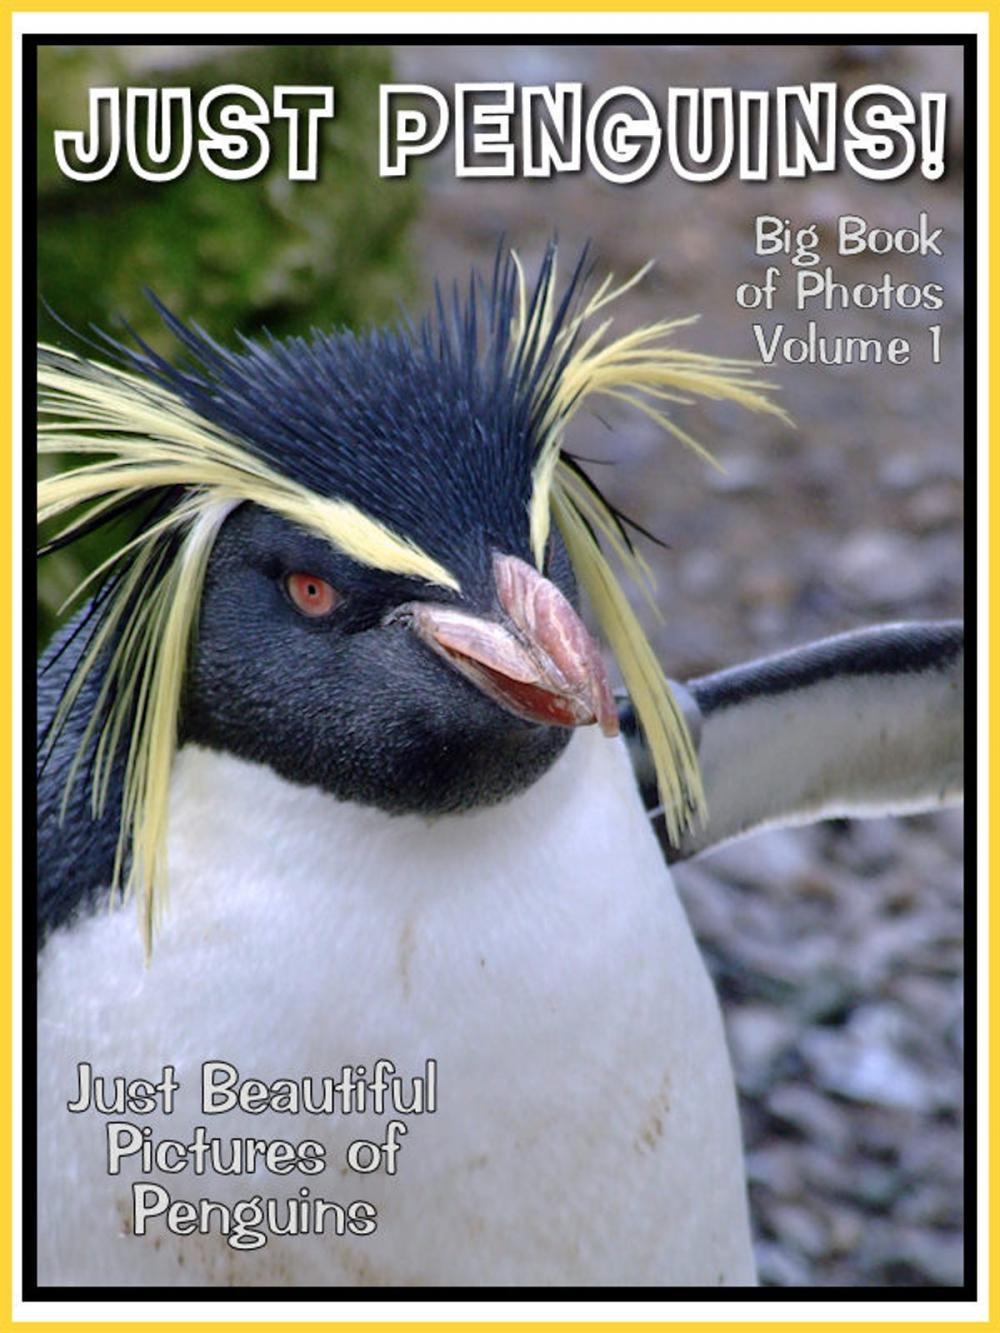 Big bigCover of Just Penguin Photos! Big Book of Penguin Photographs & Pictures Vol. 1